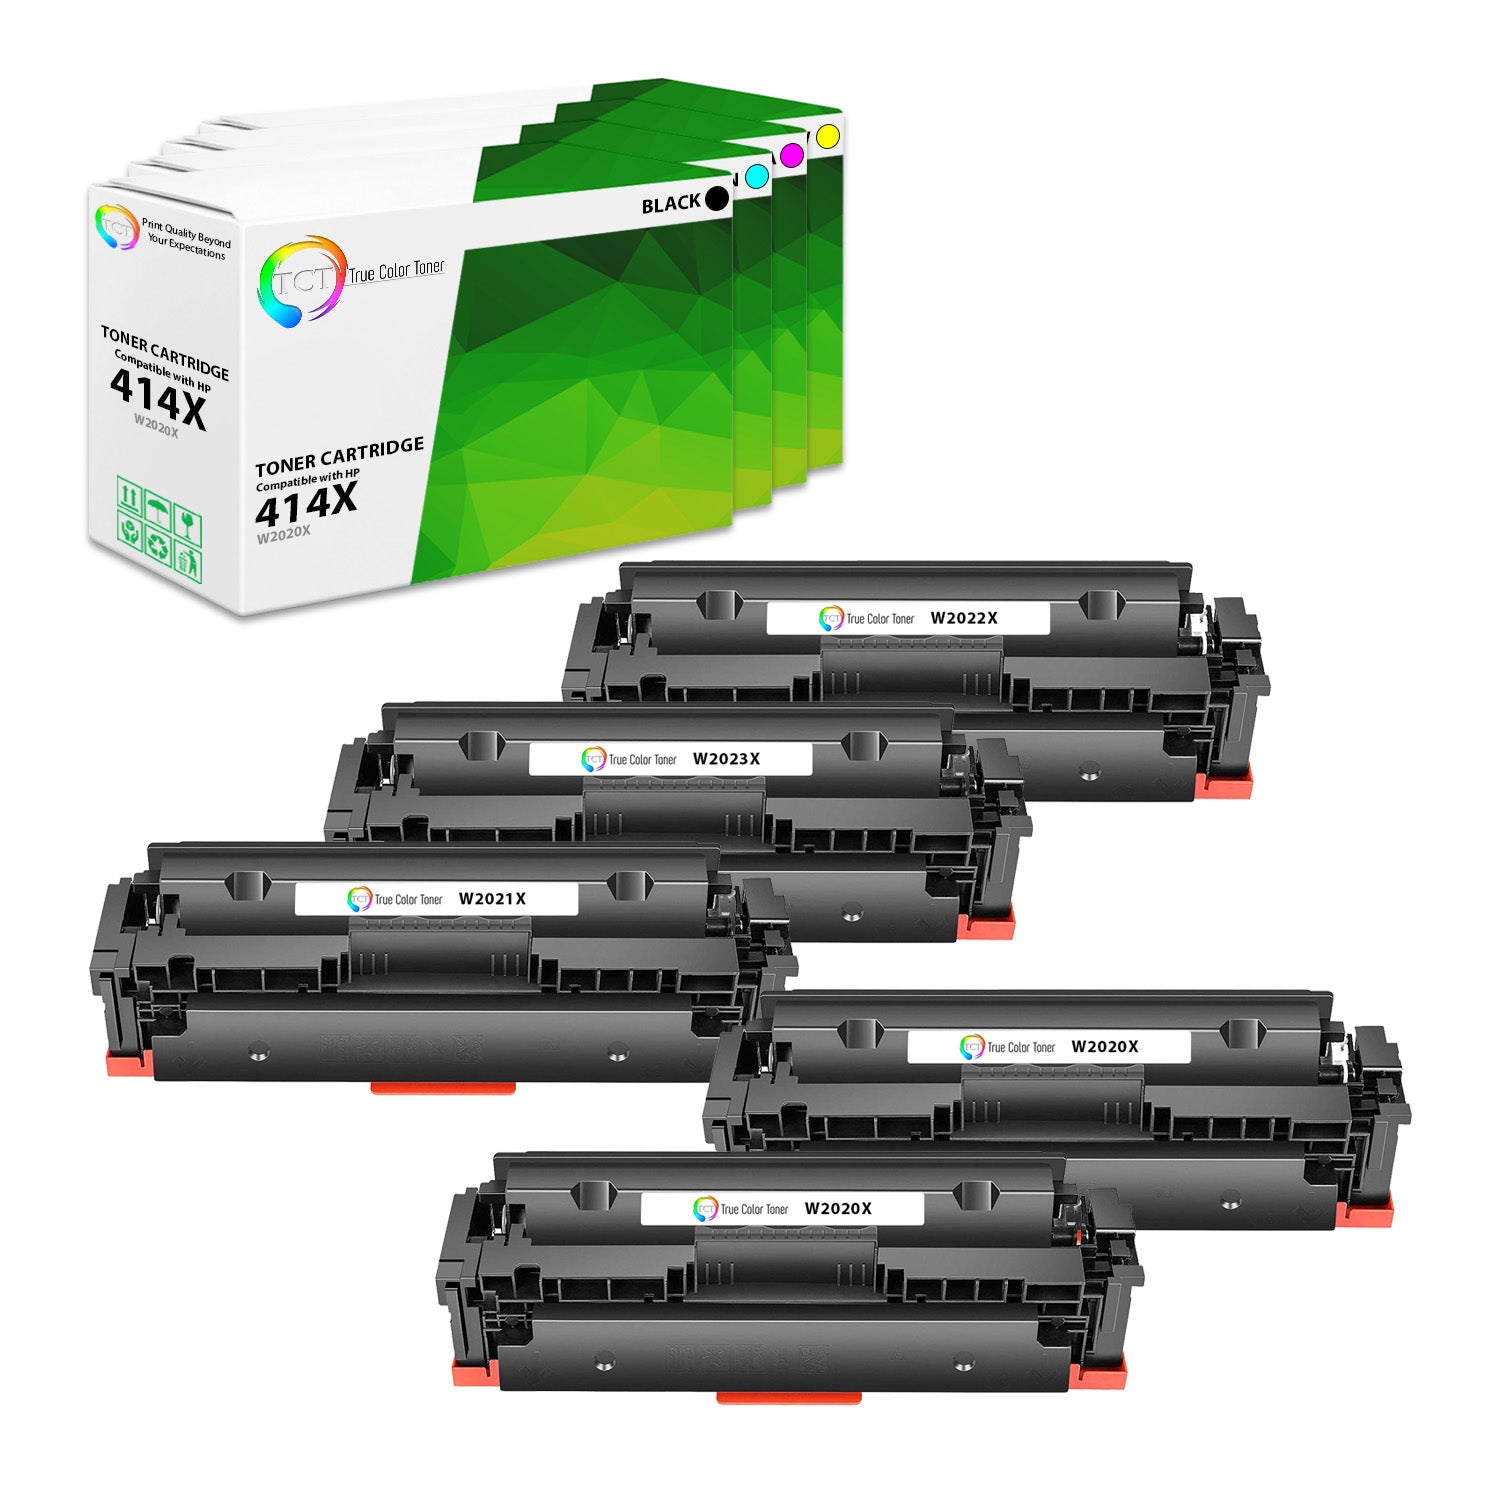 TCT Compatible High Yield Toner Cartridge Replacement for the HP 414X Series - 5 Pack (BK, C, M, Y)